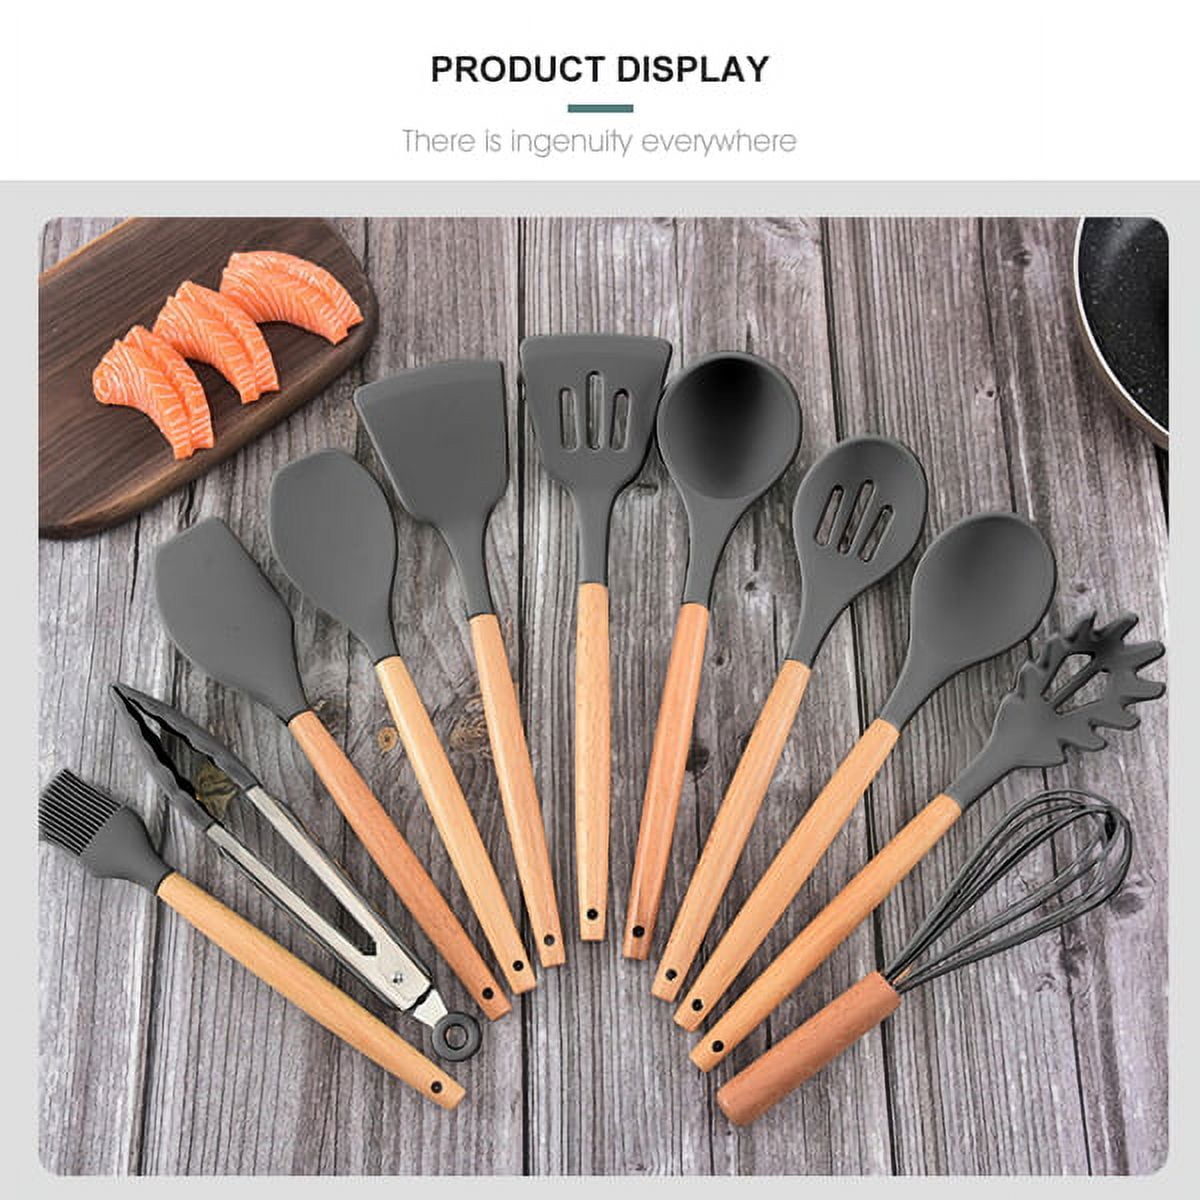 12 Pcs Silicone Cooking Utensils, Kitchen Utensil Set - 446°F Heat Resistant, Spatula,Turner Tongs, Spoon, Brush, Whisk. Yellow Kitchen Gadgets